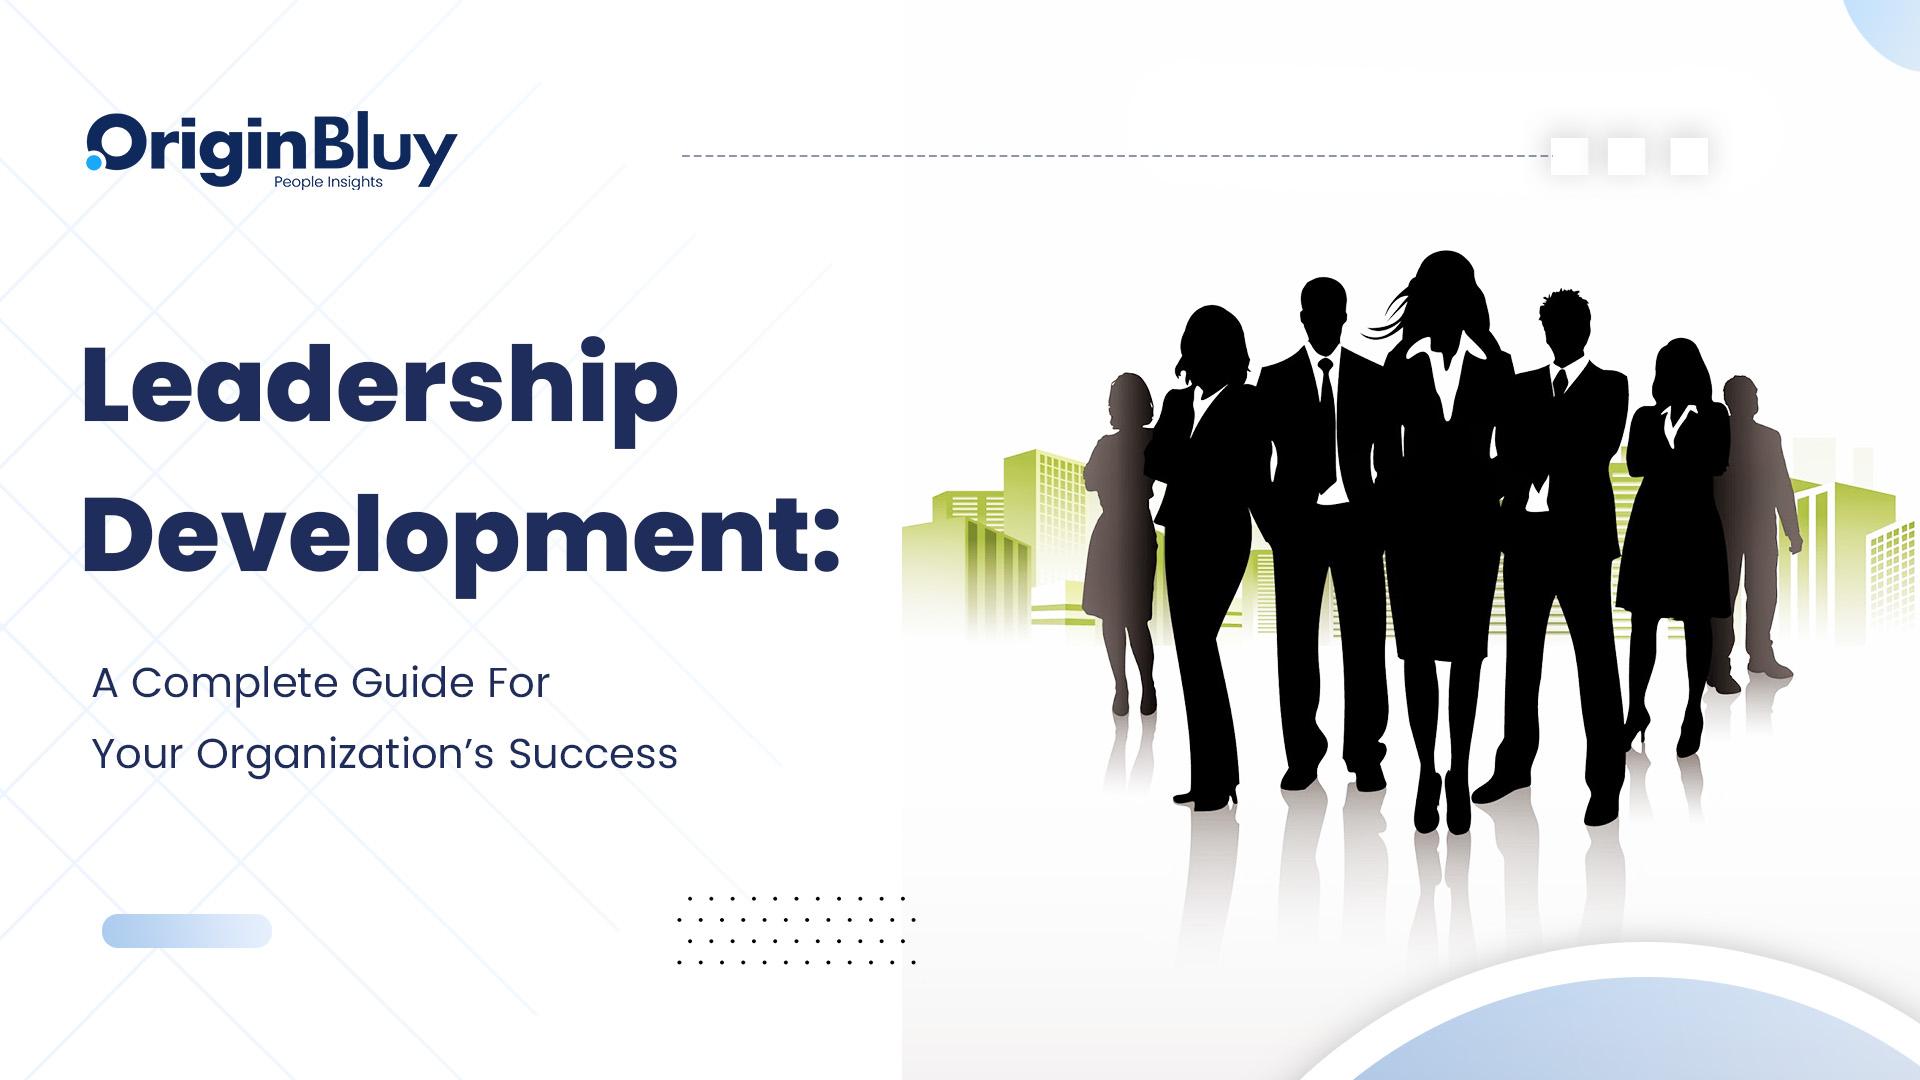 Leadership Development A Complete Guide For Your Organization’s Success